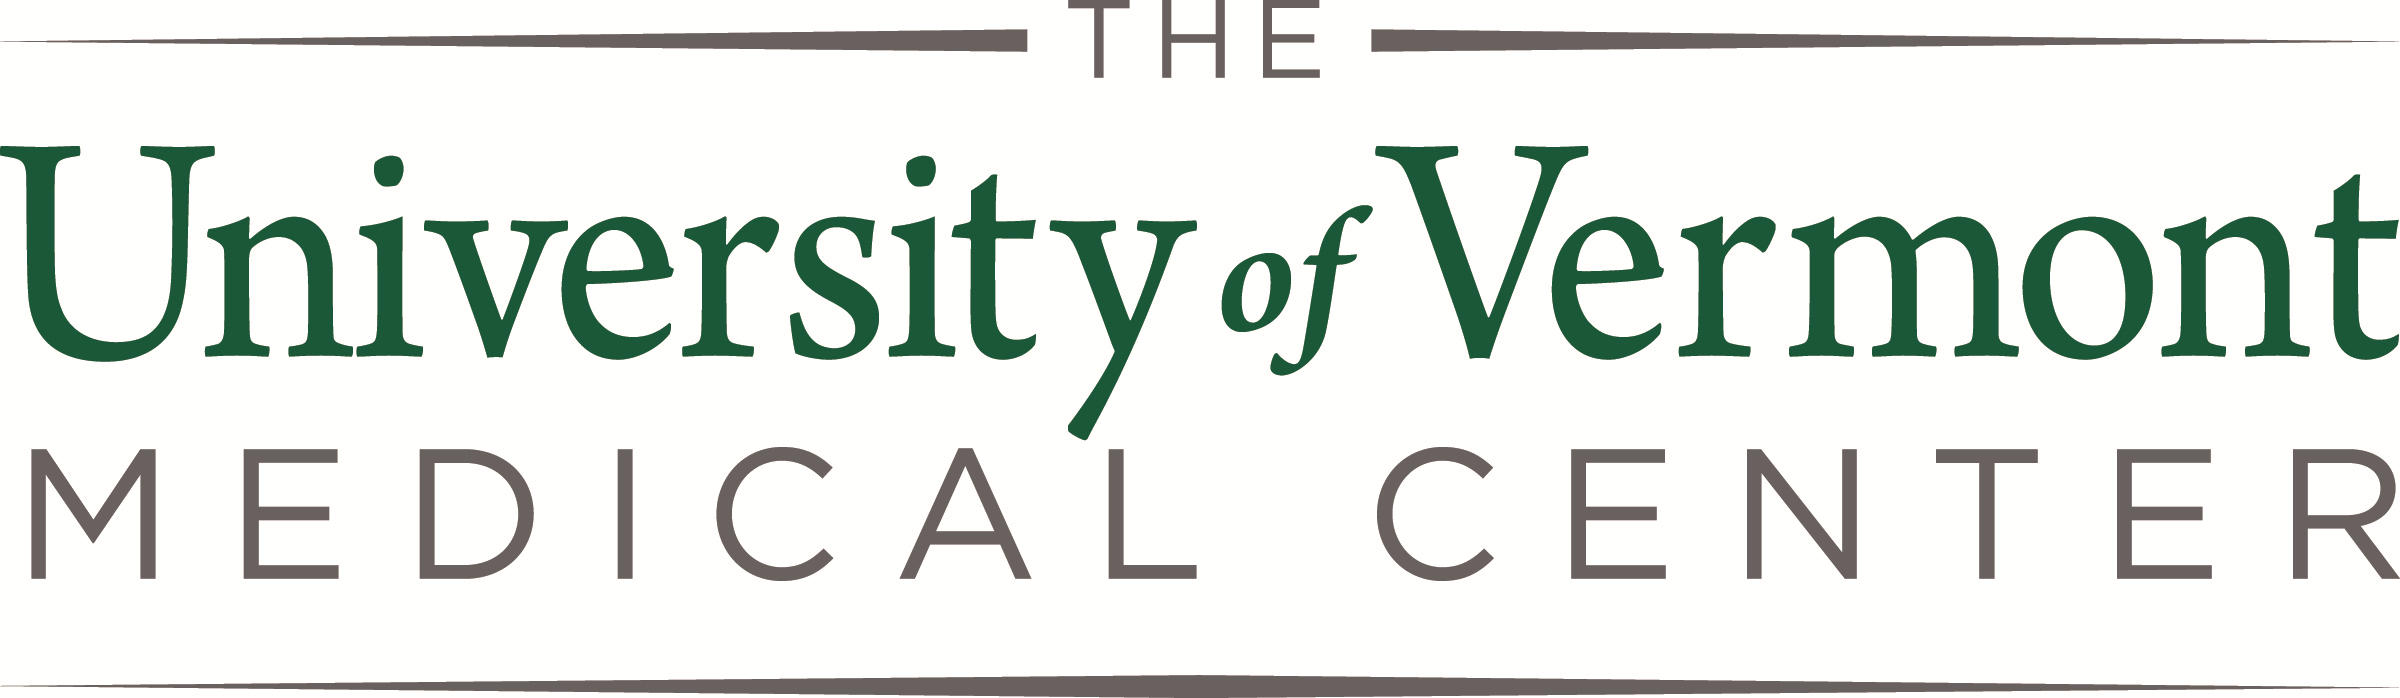 The University Of Vermont Medical Center Saves Over 1 Million Through